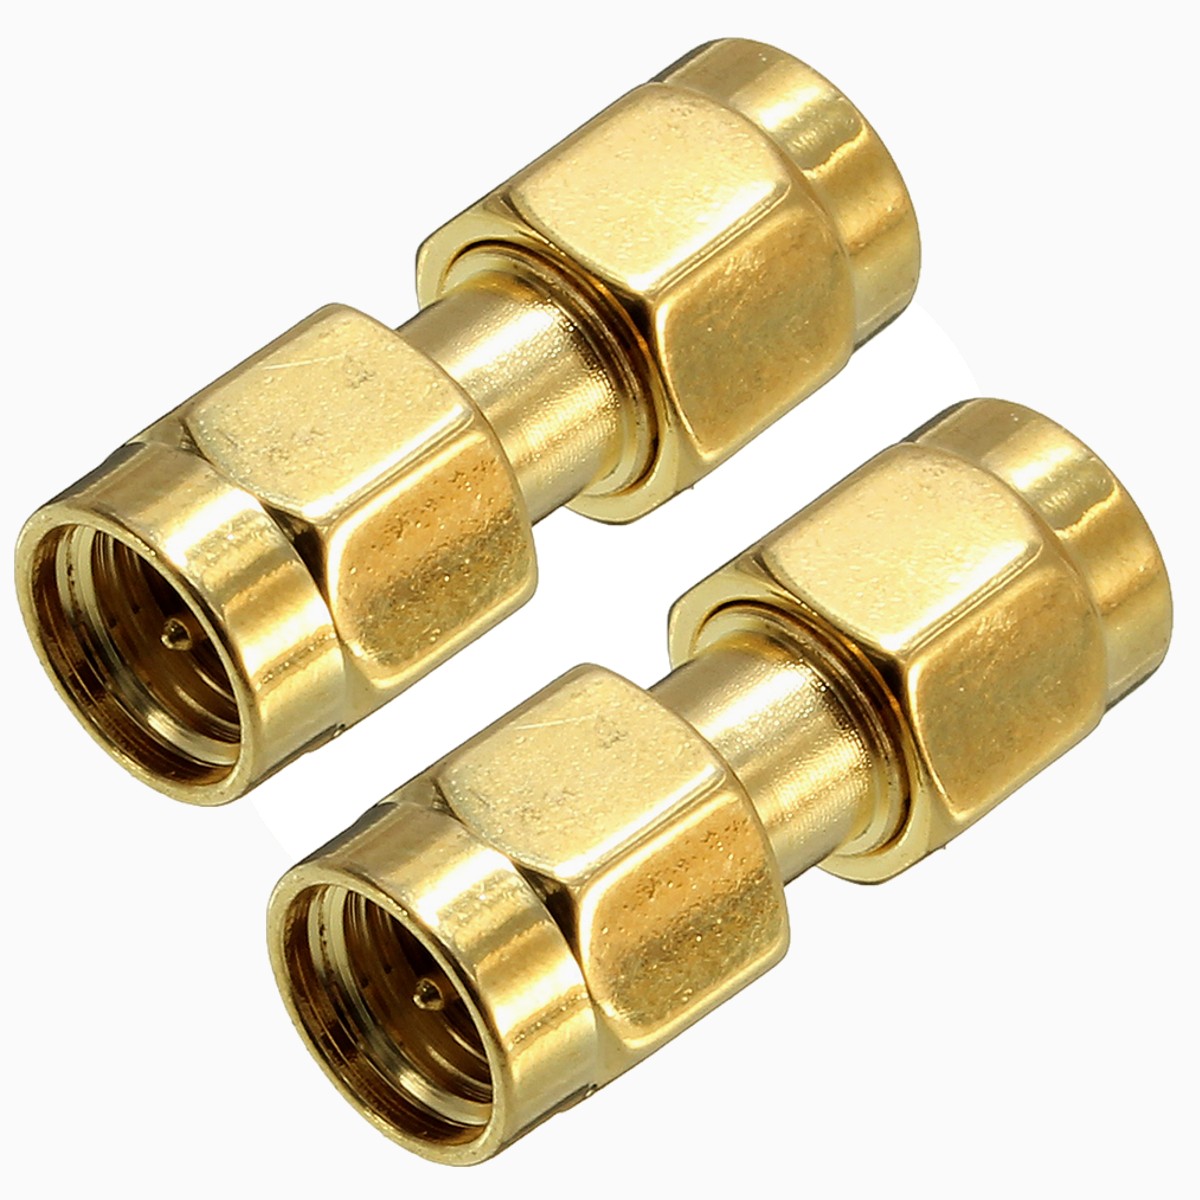 Excellwayreg-CA01-2Pcs-Copper-SMA-Male-To-SMA-Male-Plug-RF-Coaxial-Adapter-Connector-1073343-2